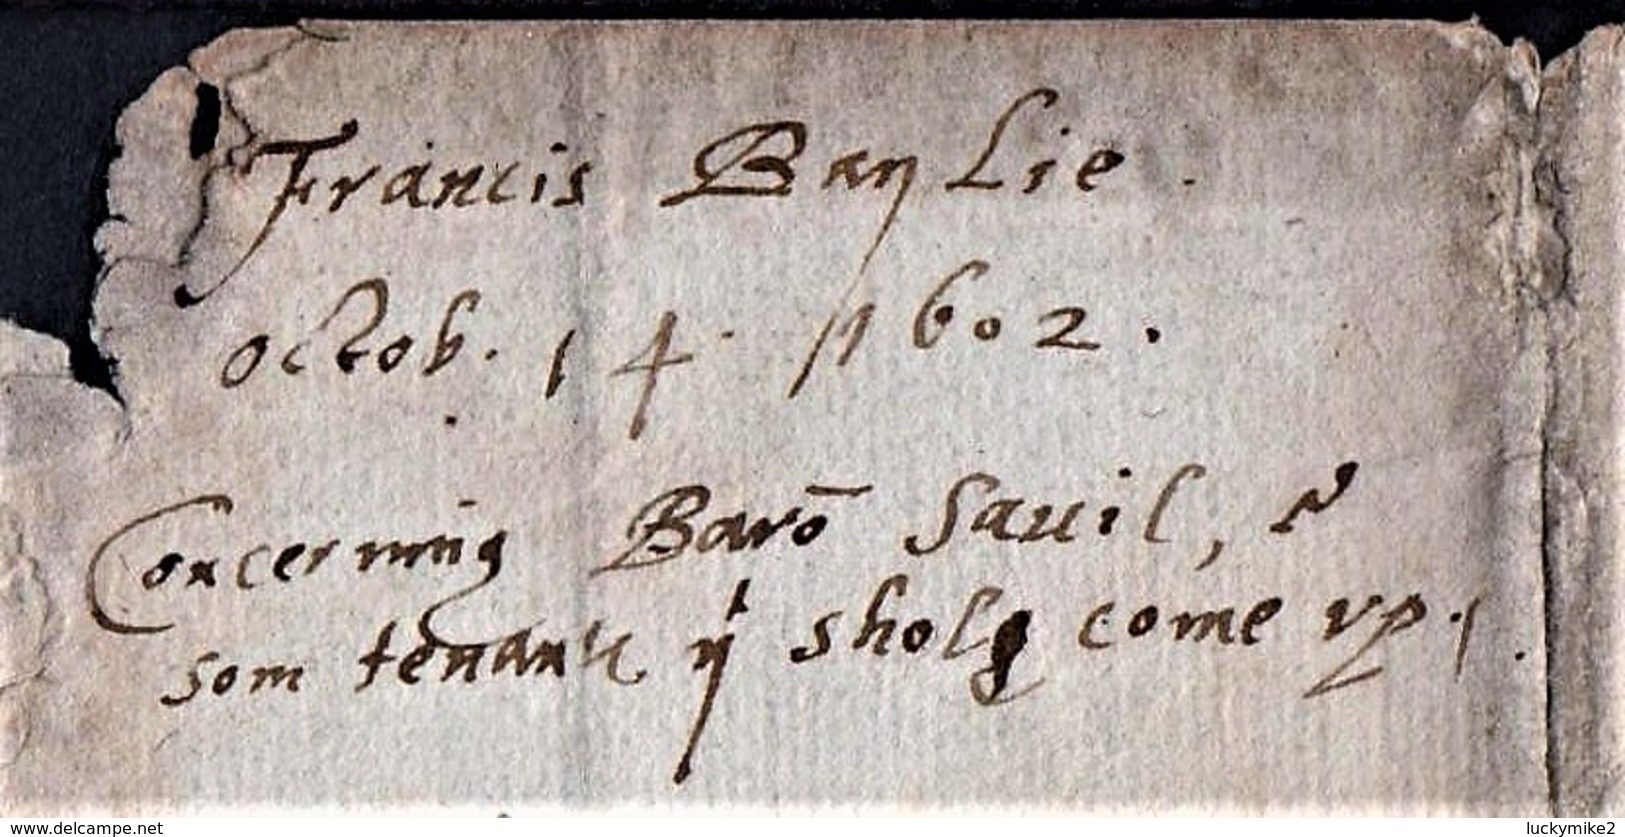 1602 letter "To the right worshipful Sir Edward Crobye, knight, this be delivered" from "Francis Bayllye". ref 0361